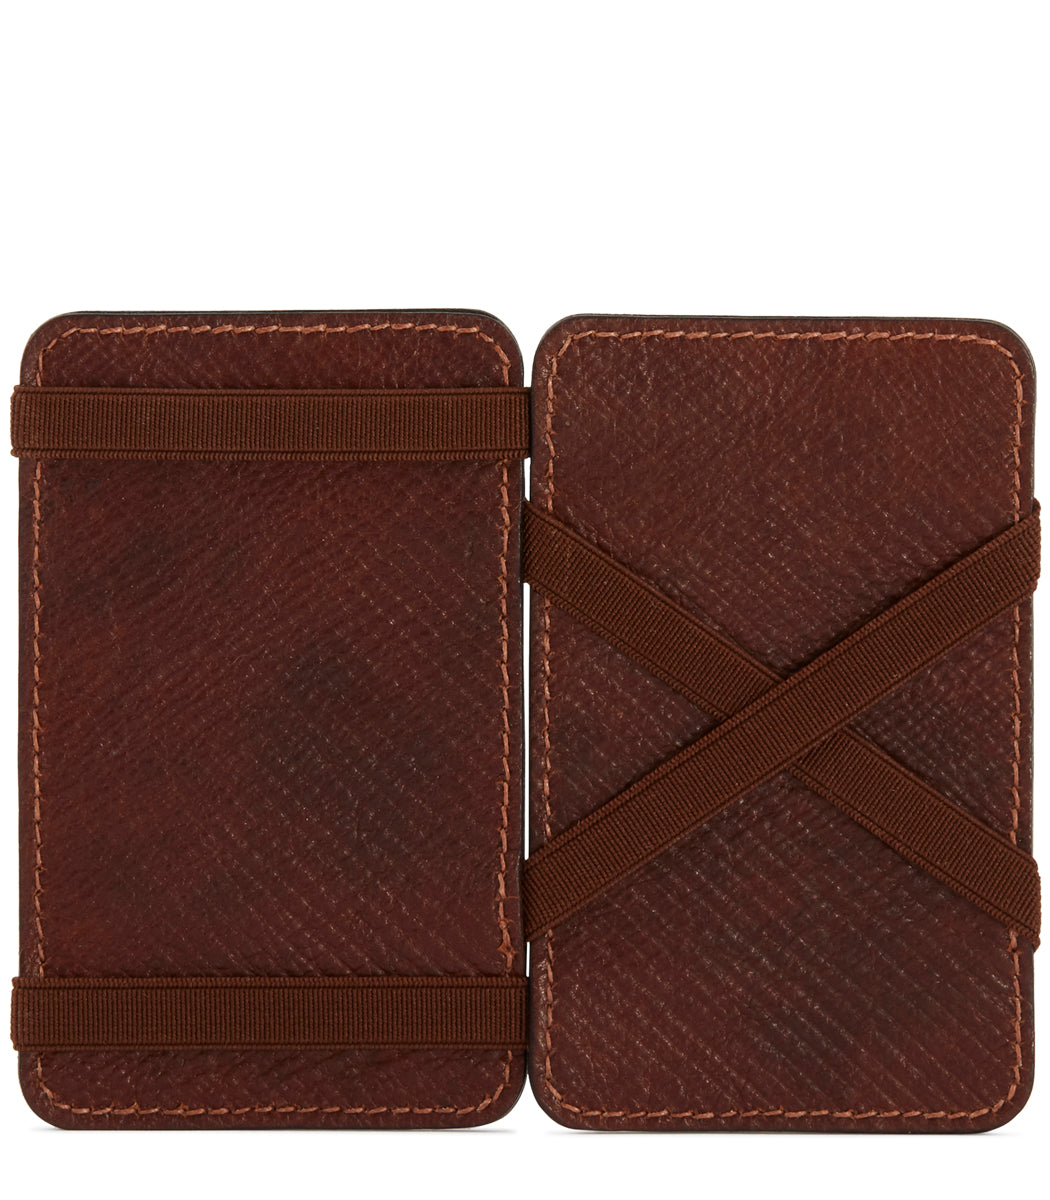 Russia Leather Magic Wallet In Brown